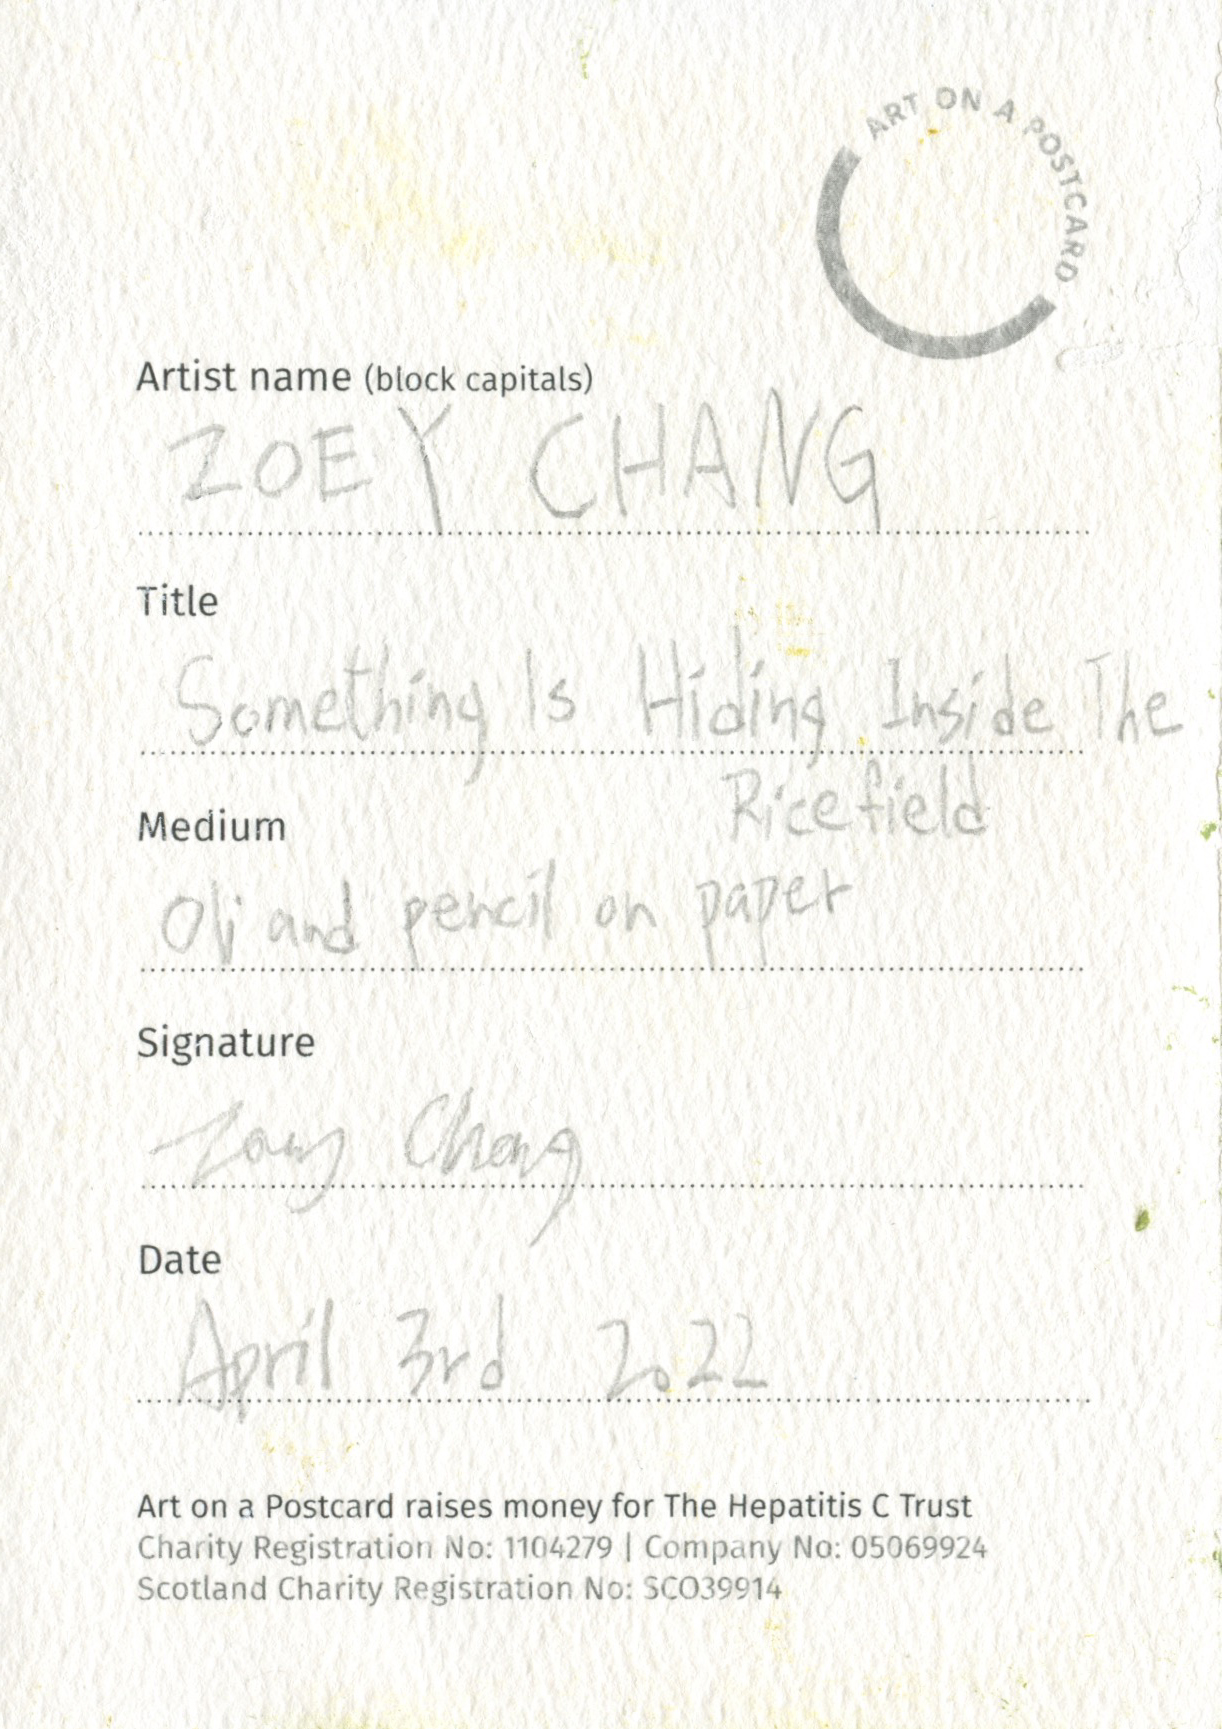 22. Zoey Chang - Something is Hiding Inside the Ricefield - BACK